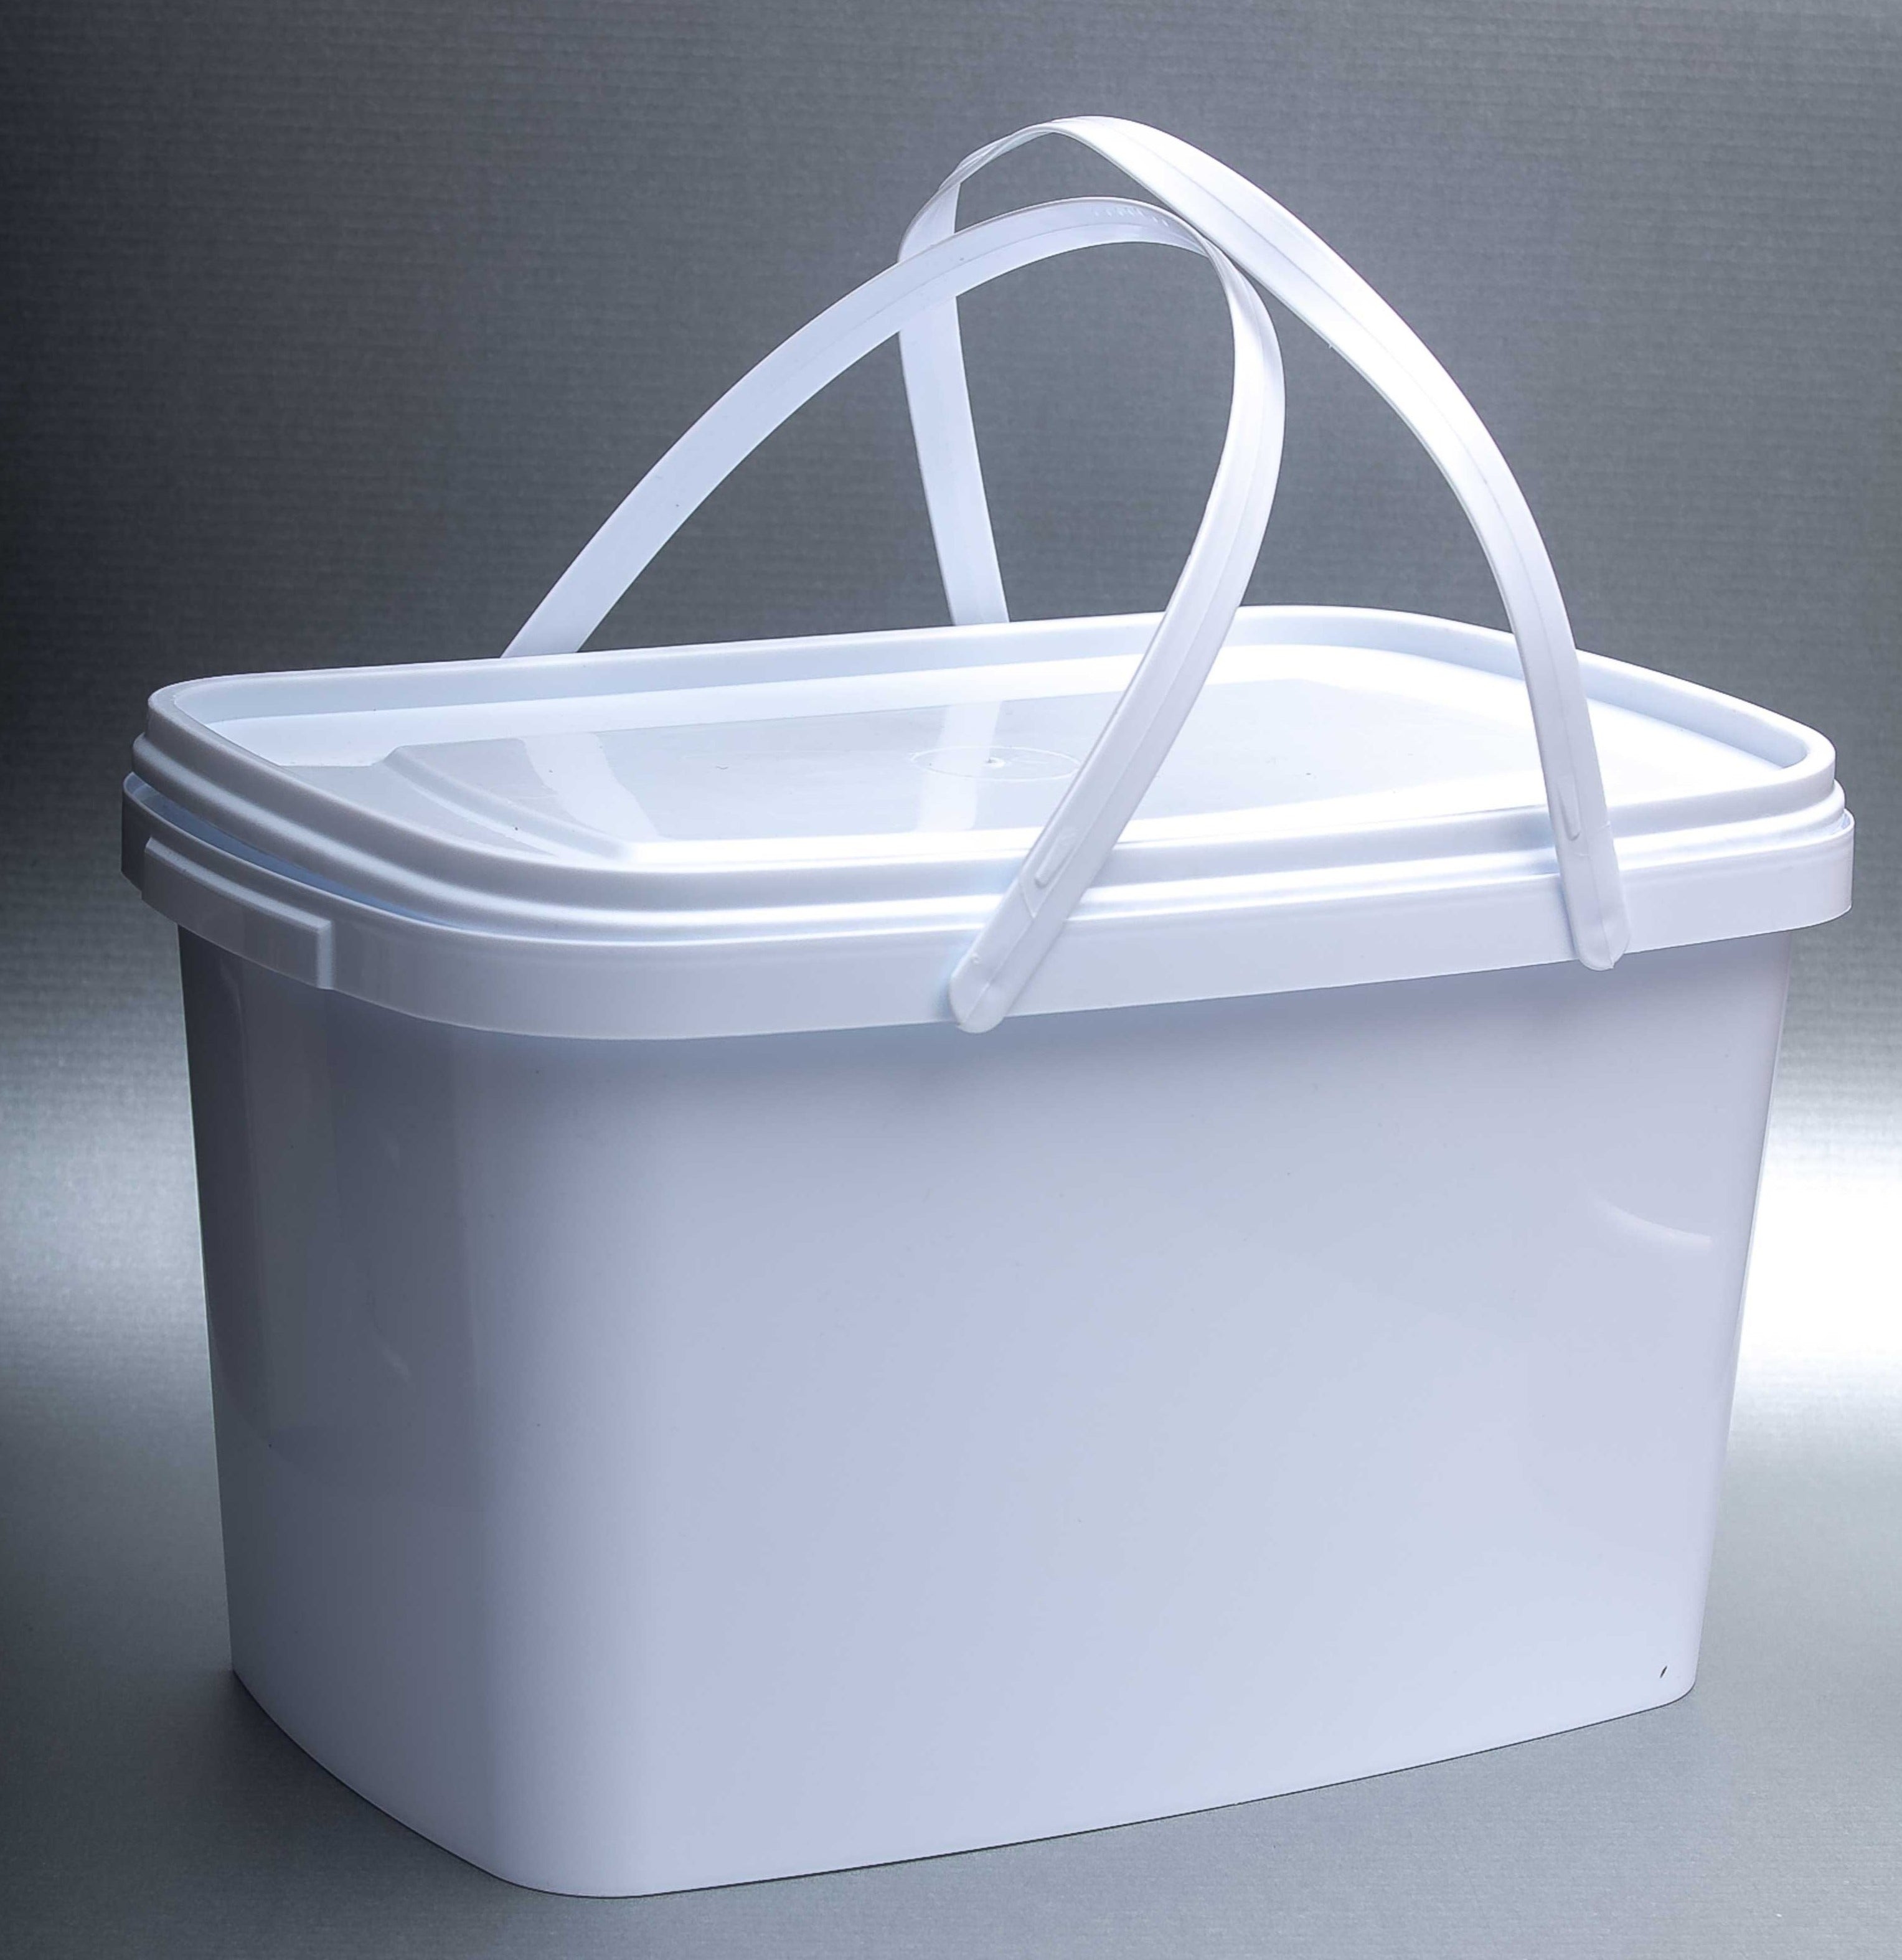 5L Bucket Rectangular Tamperproof with Handle and Lid